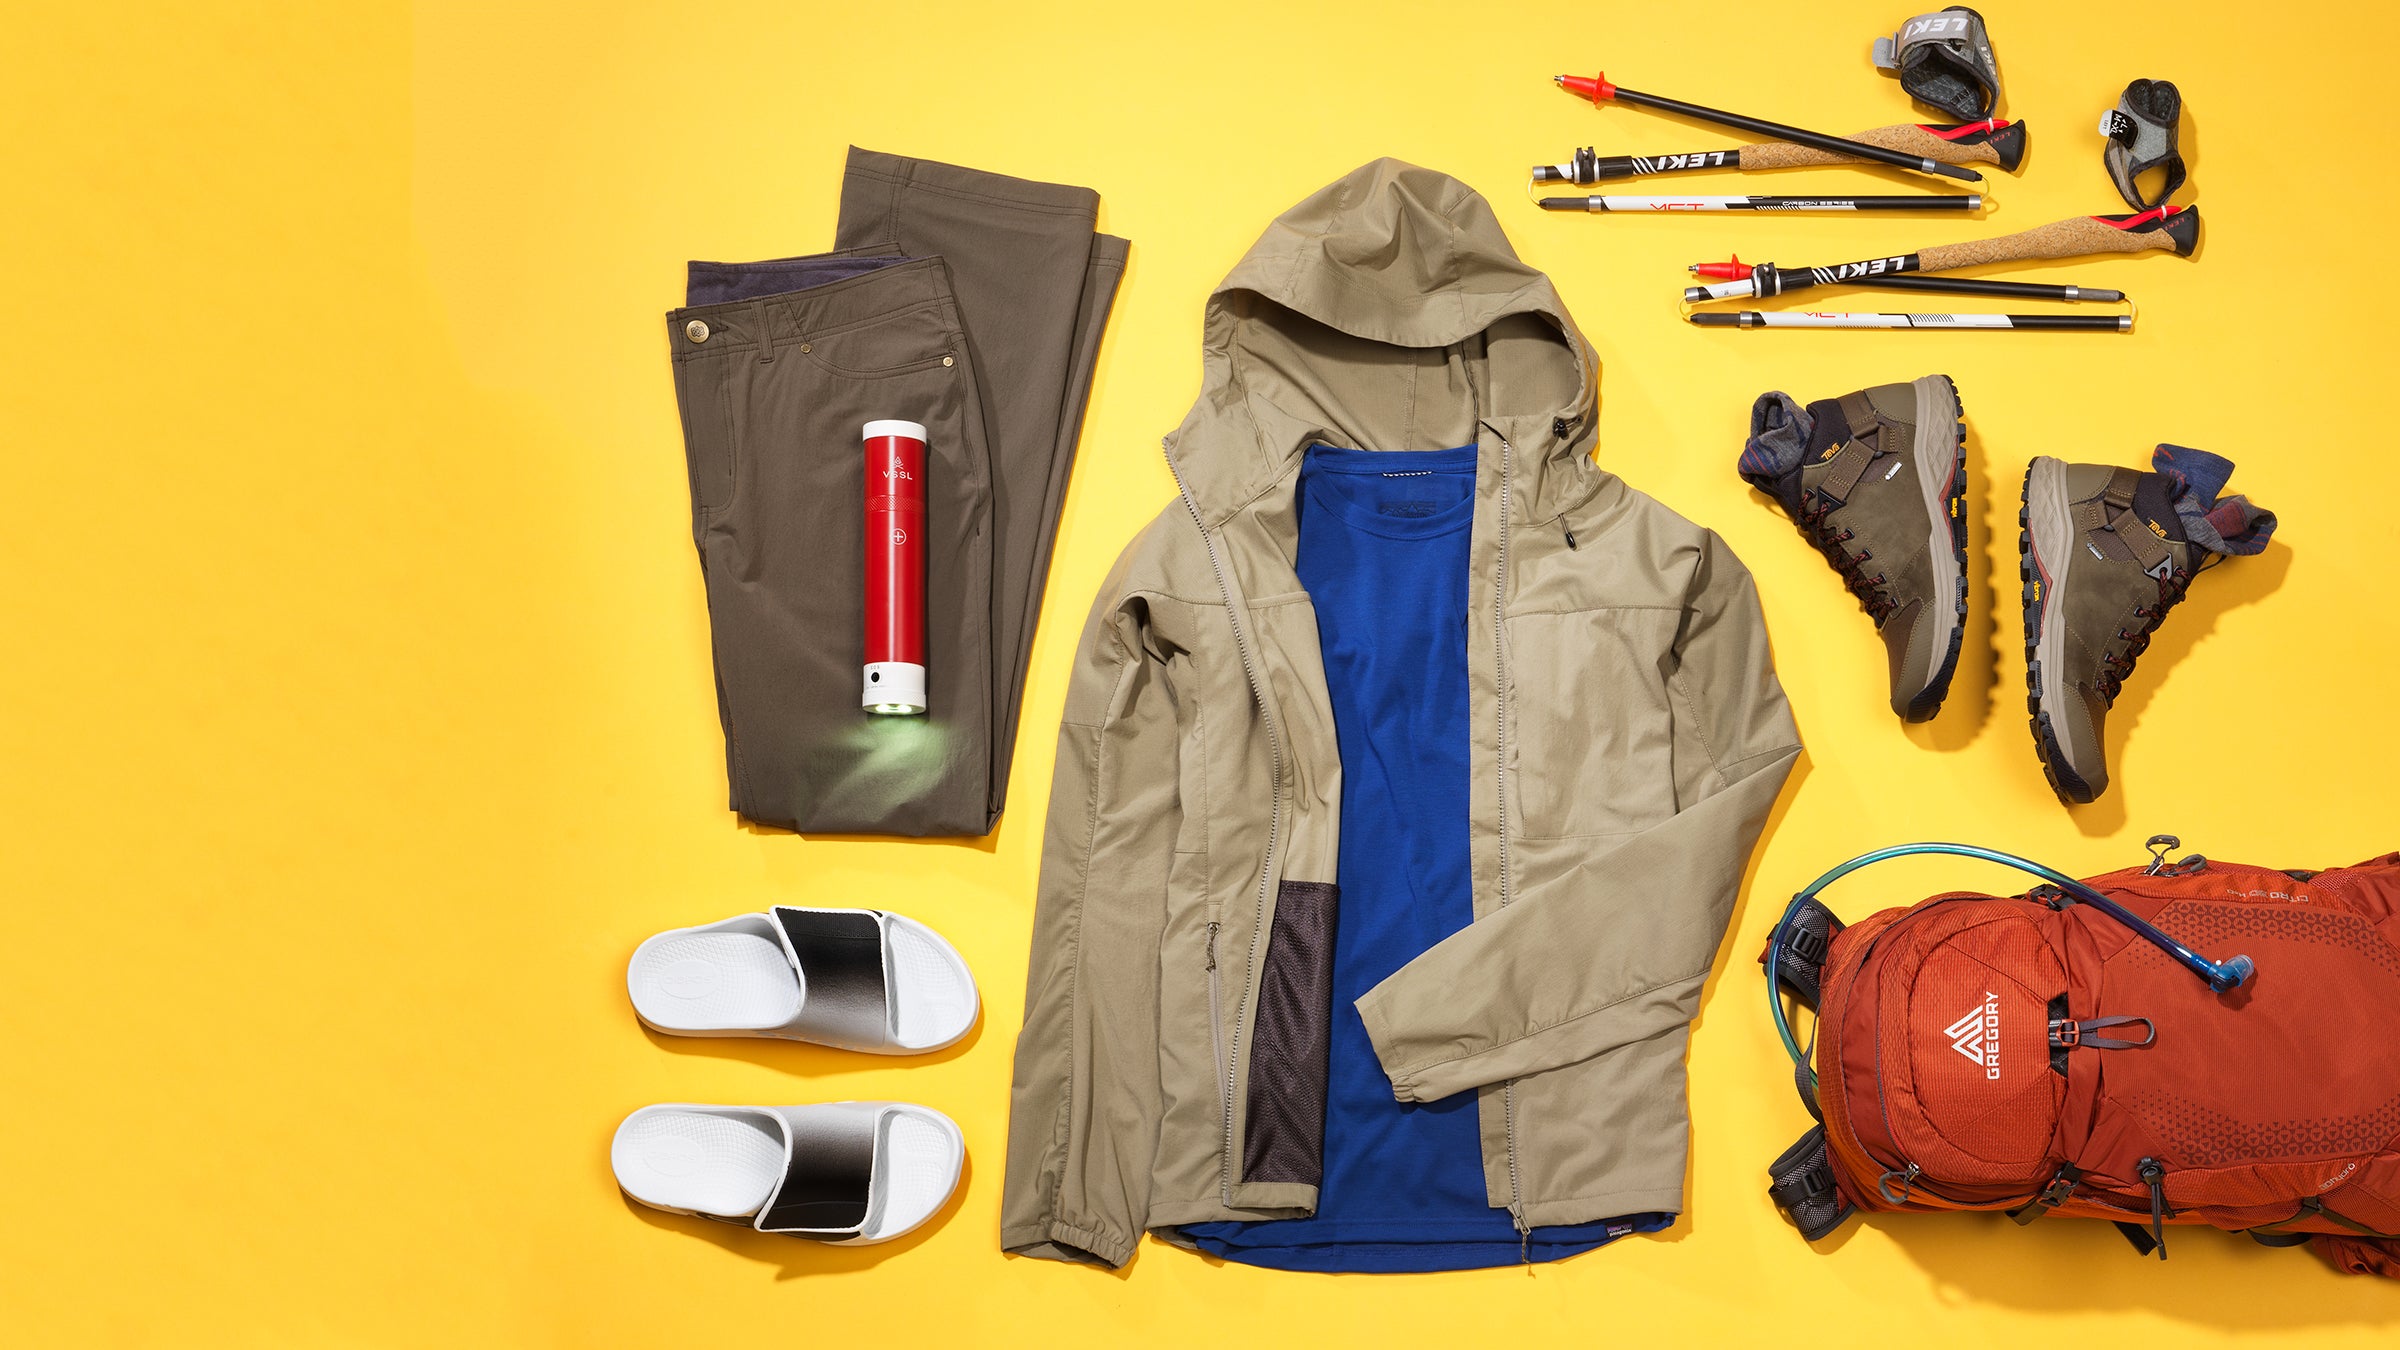 Outdoor gear designed by hikers, for hikers.